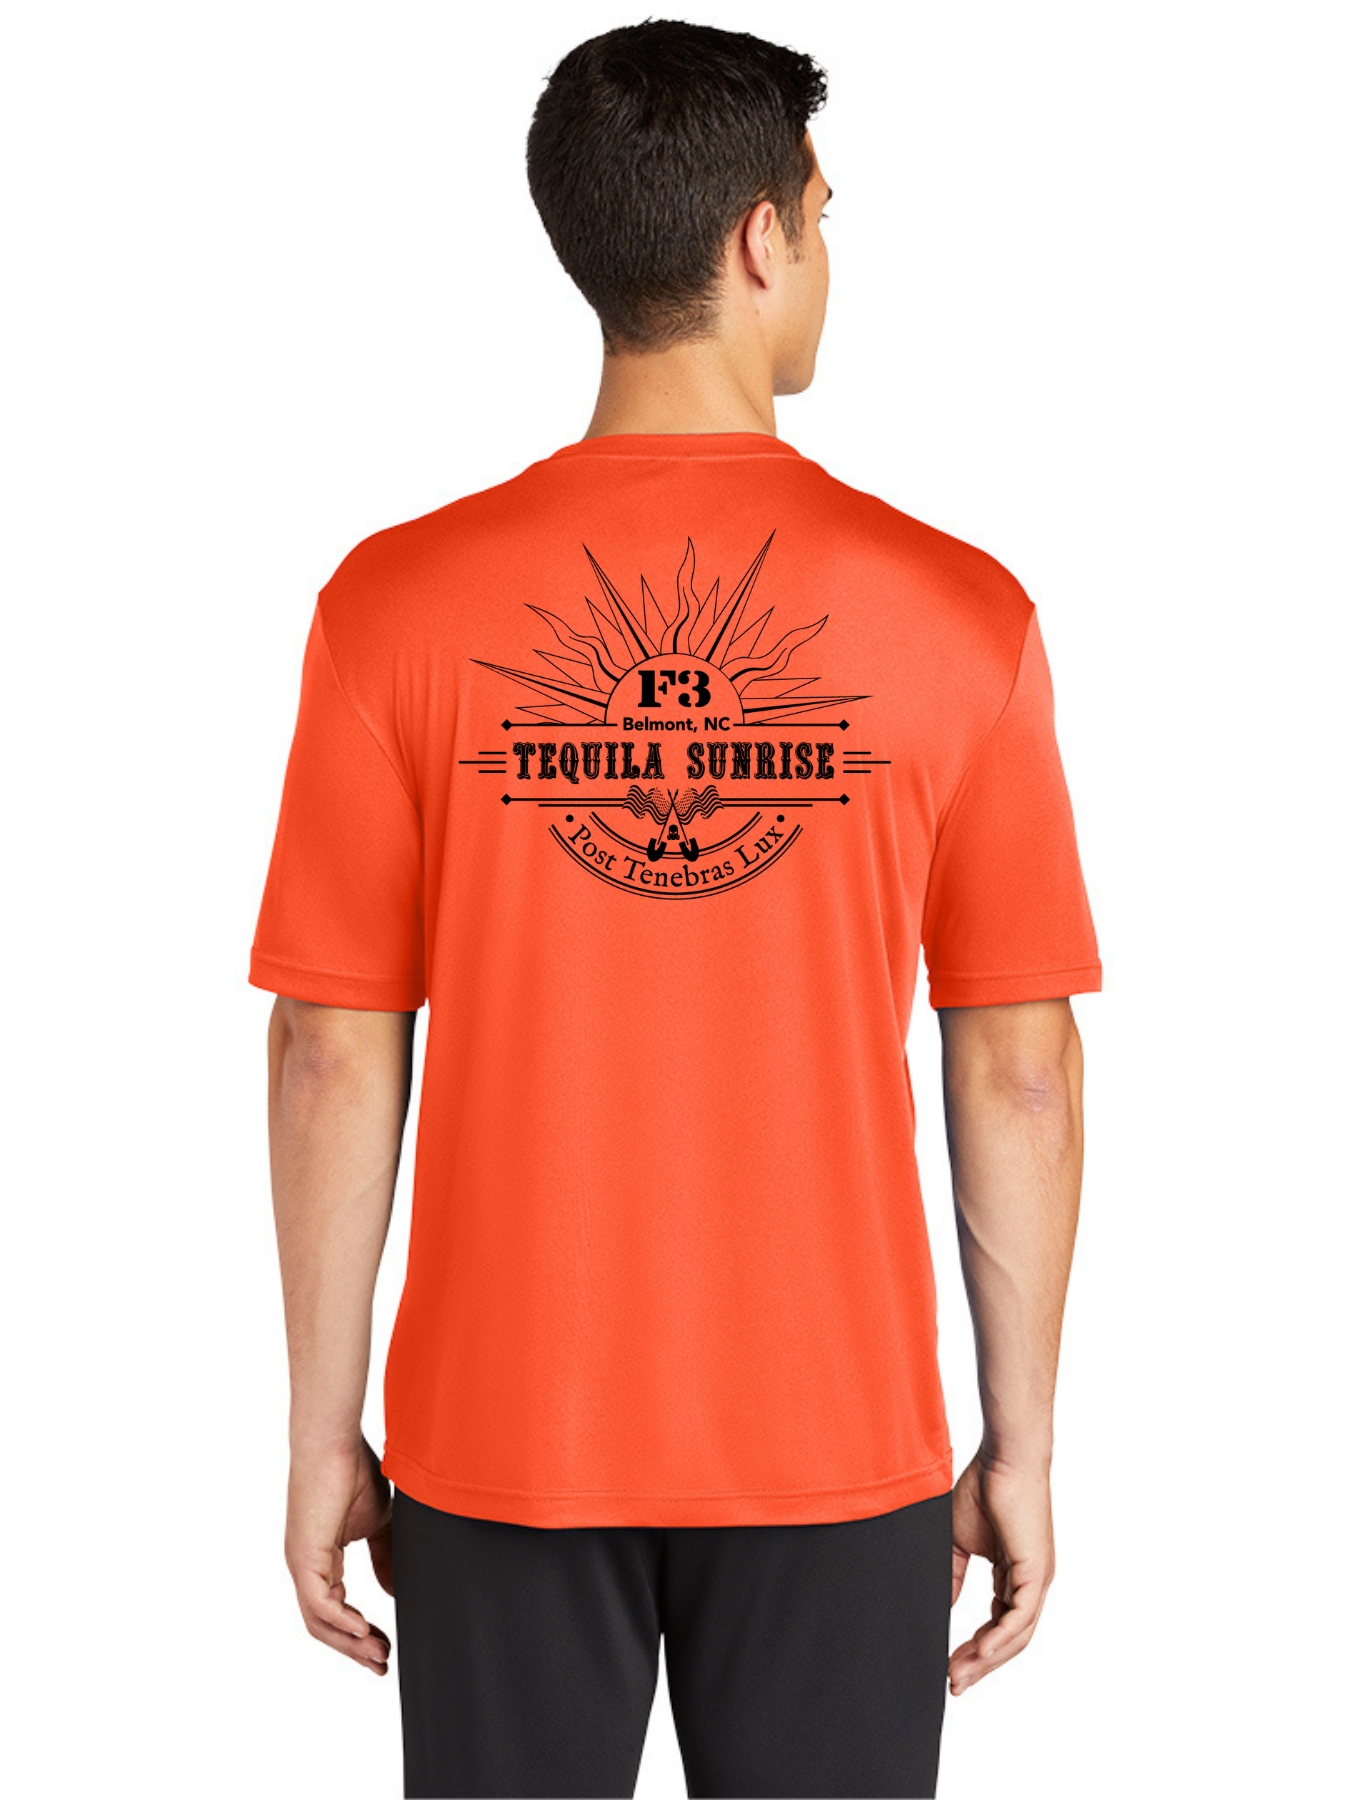 F3 Tequila Sunrise Pre-Order May 2022